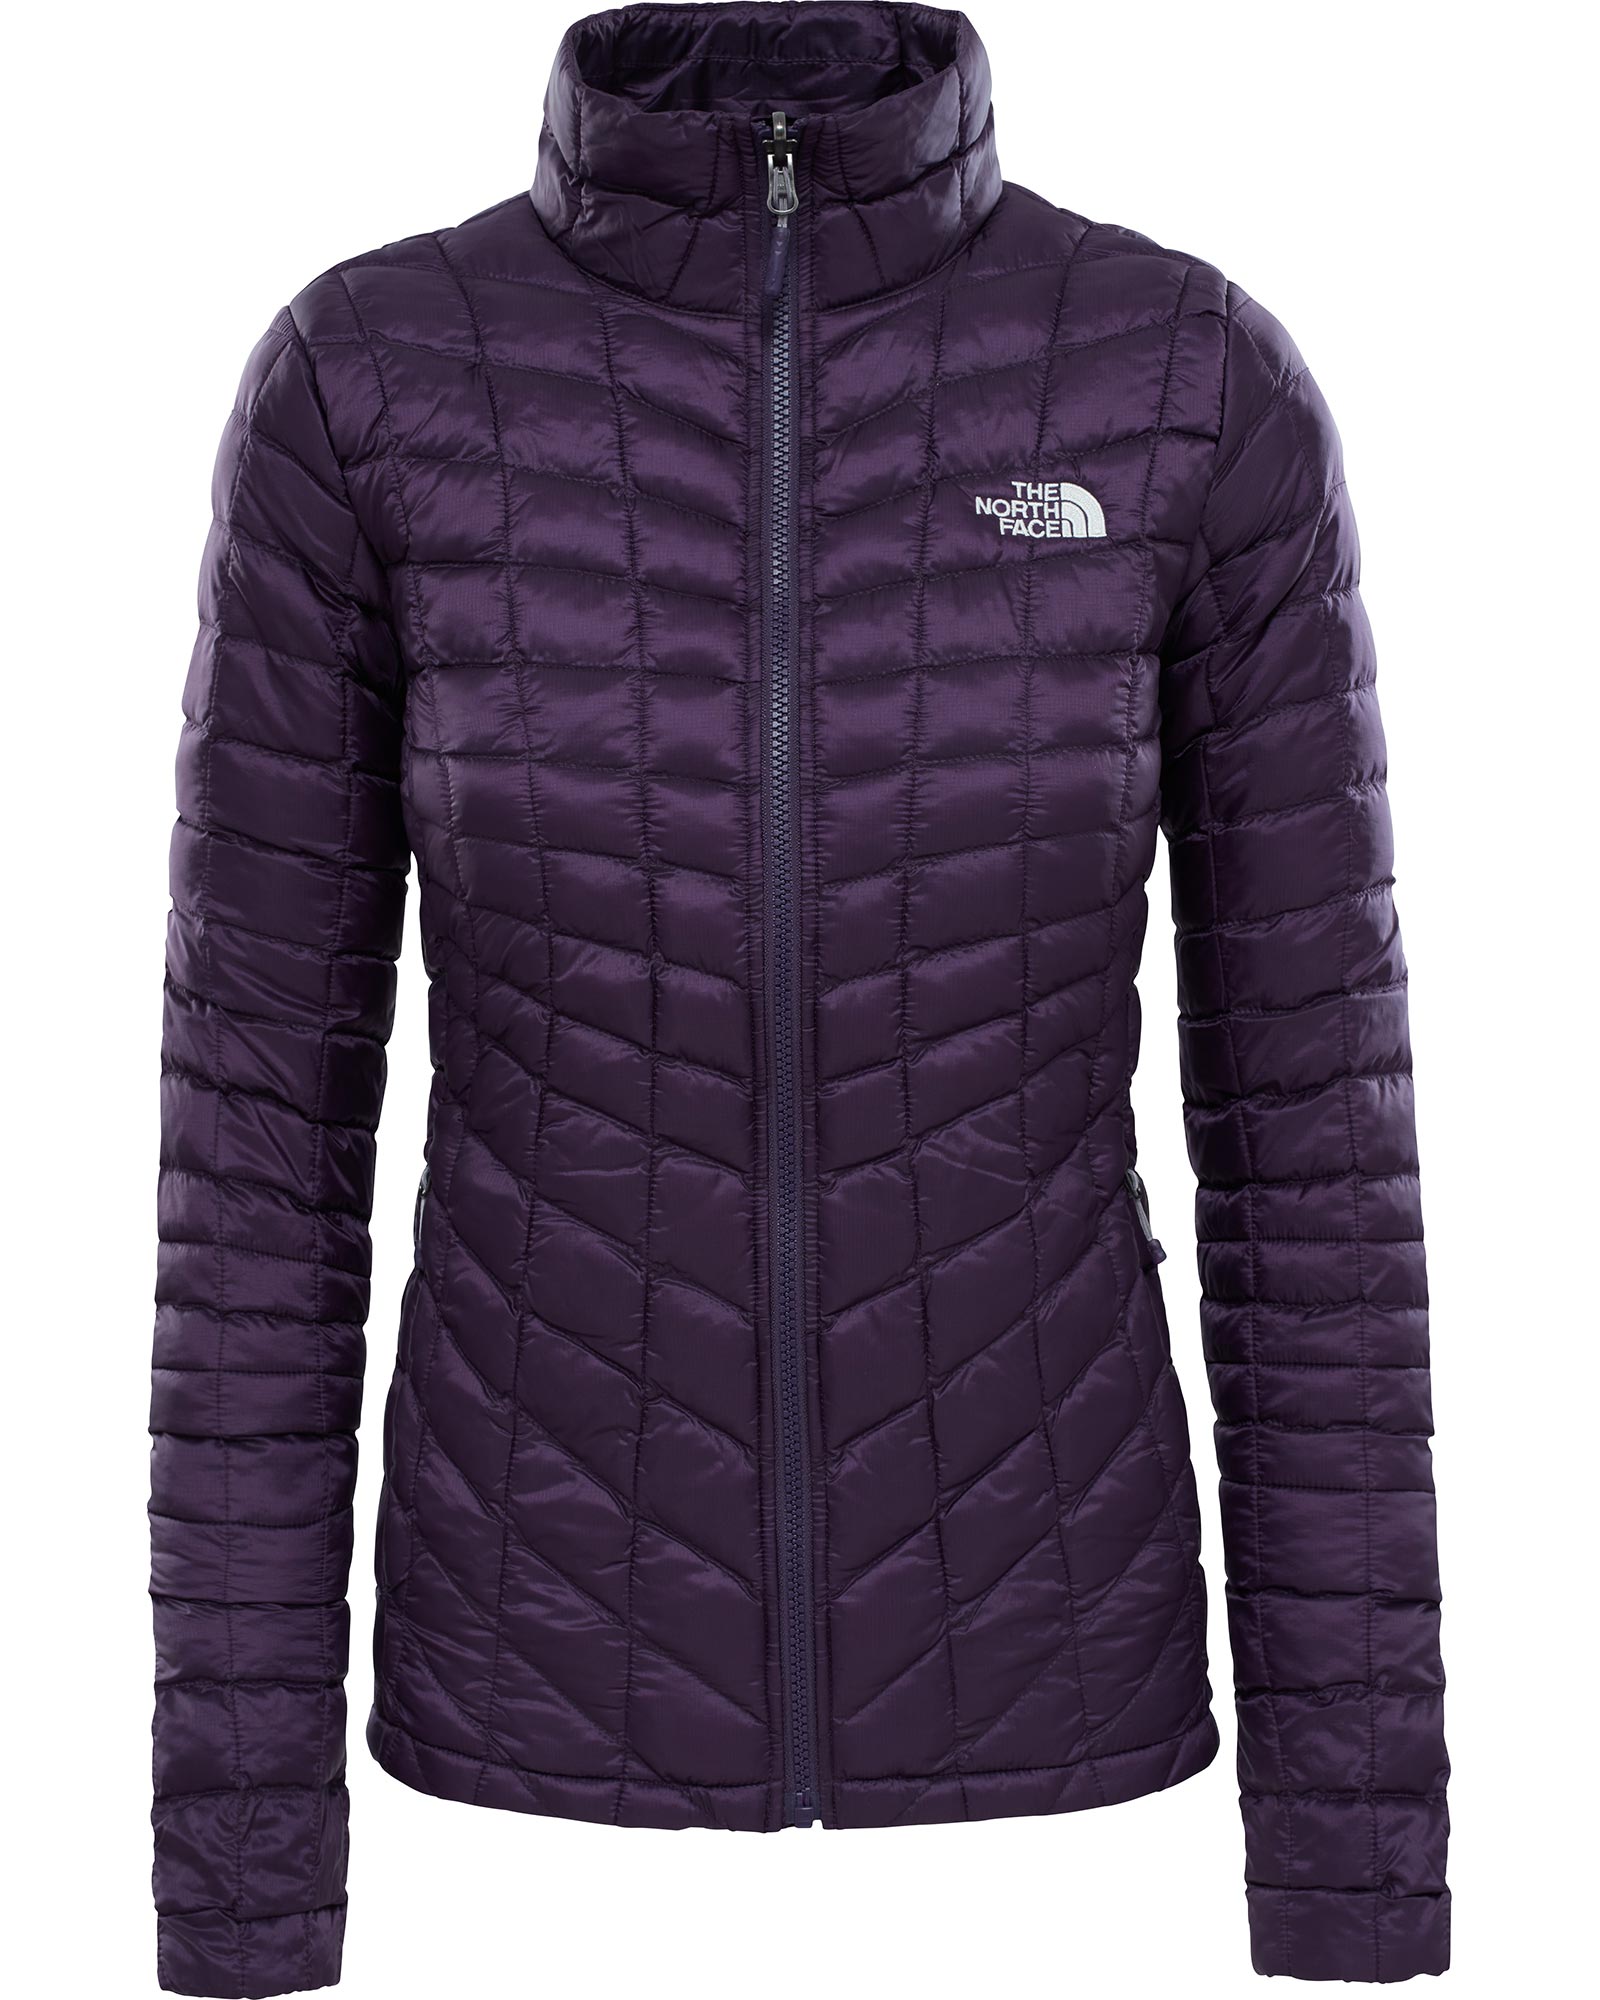 The North Face ThermoBall Women’s Zip In Jacket - Dark Eggplant XS